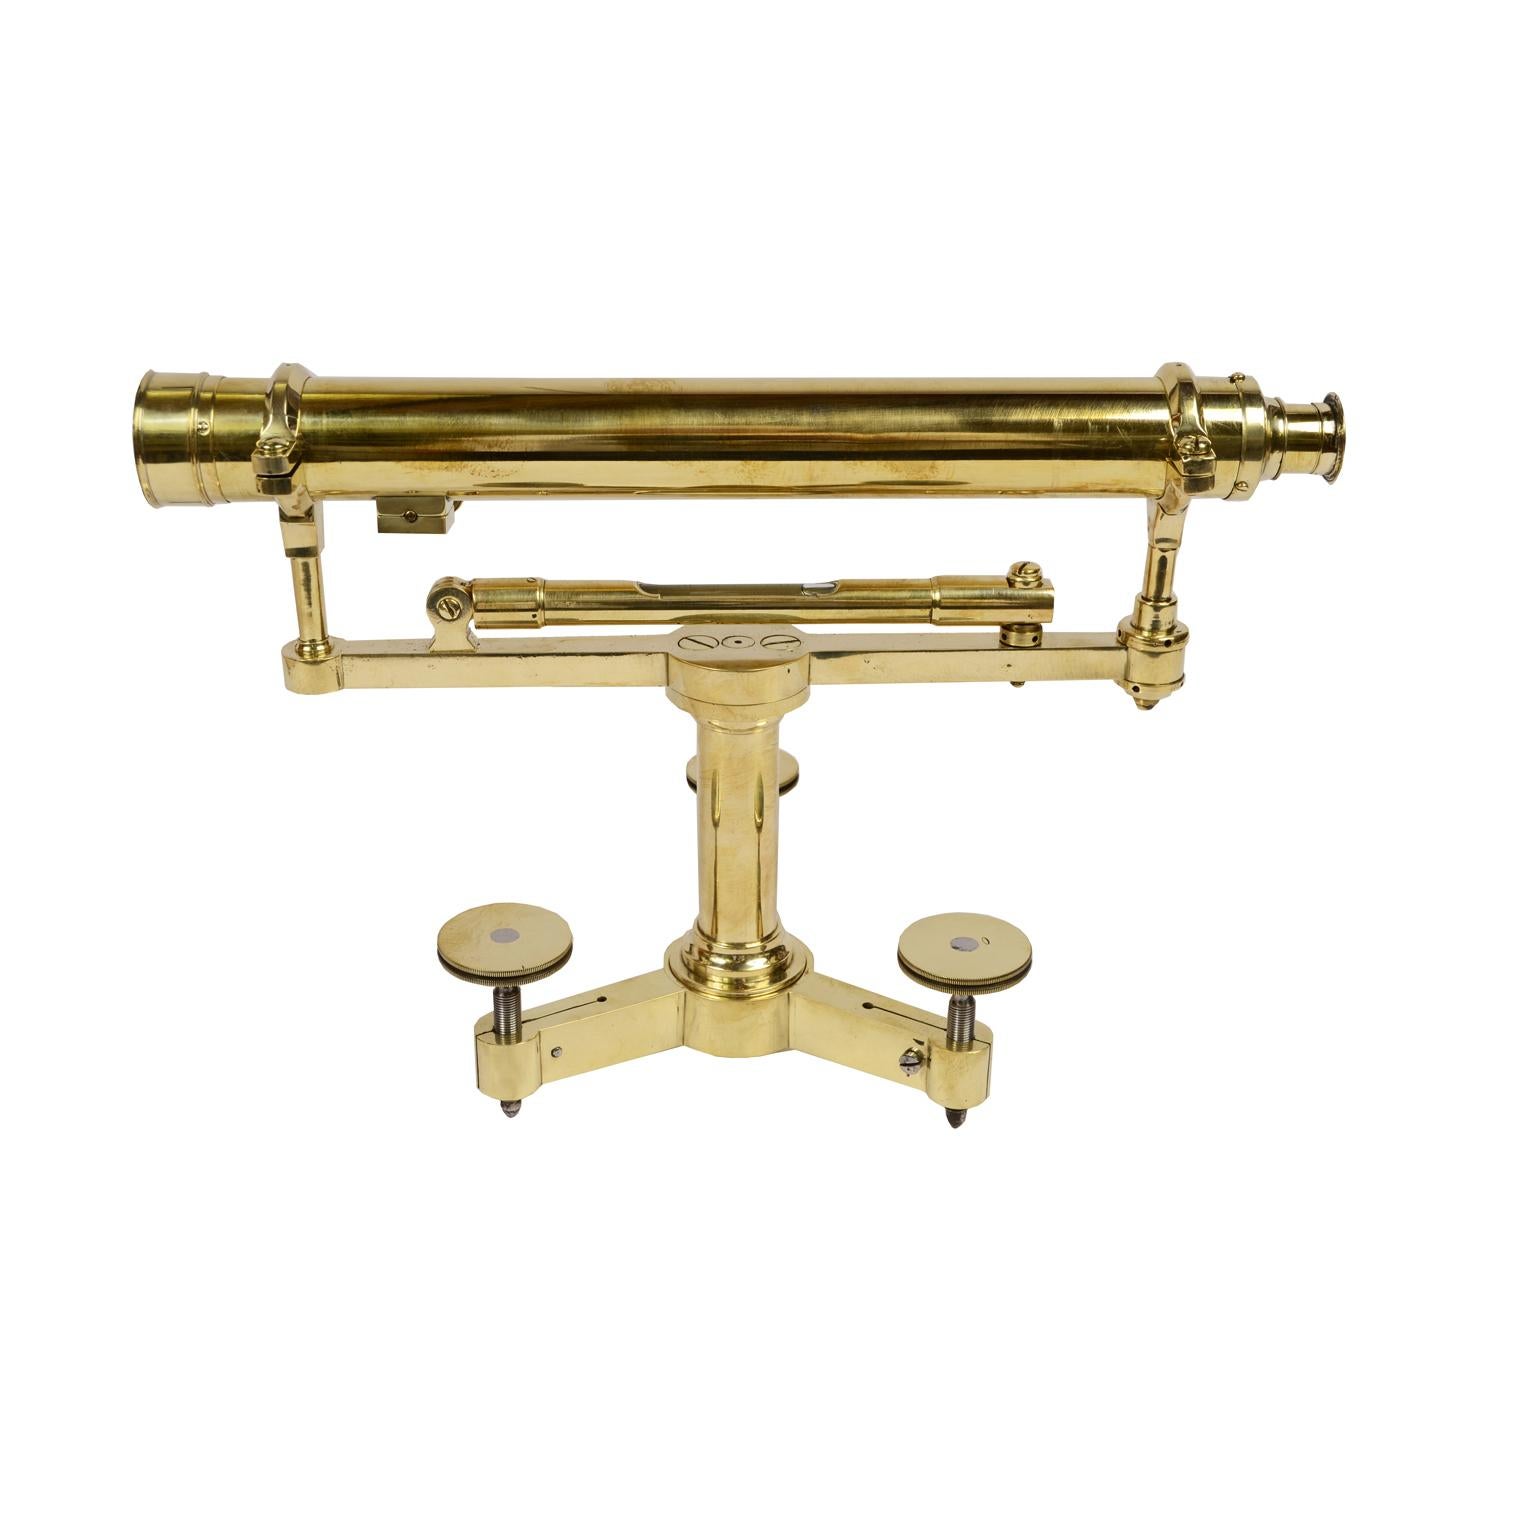 Telescope topographic level of brass, it is an instrument consisting of a telescope fixed parallel to the level, three-spoke base with adjustment screws. English manufacture from the second half of the 19th century, in excellent condition. Measures: